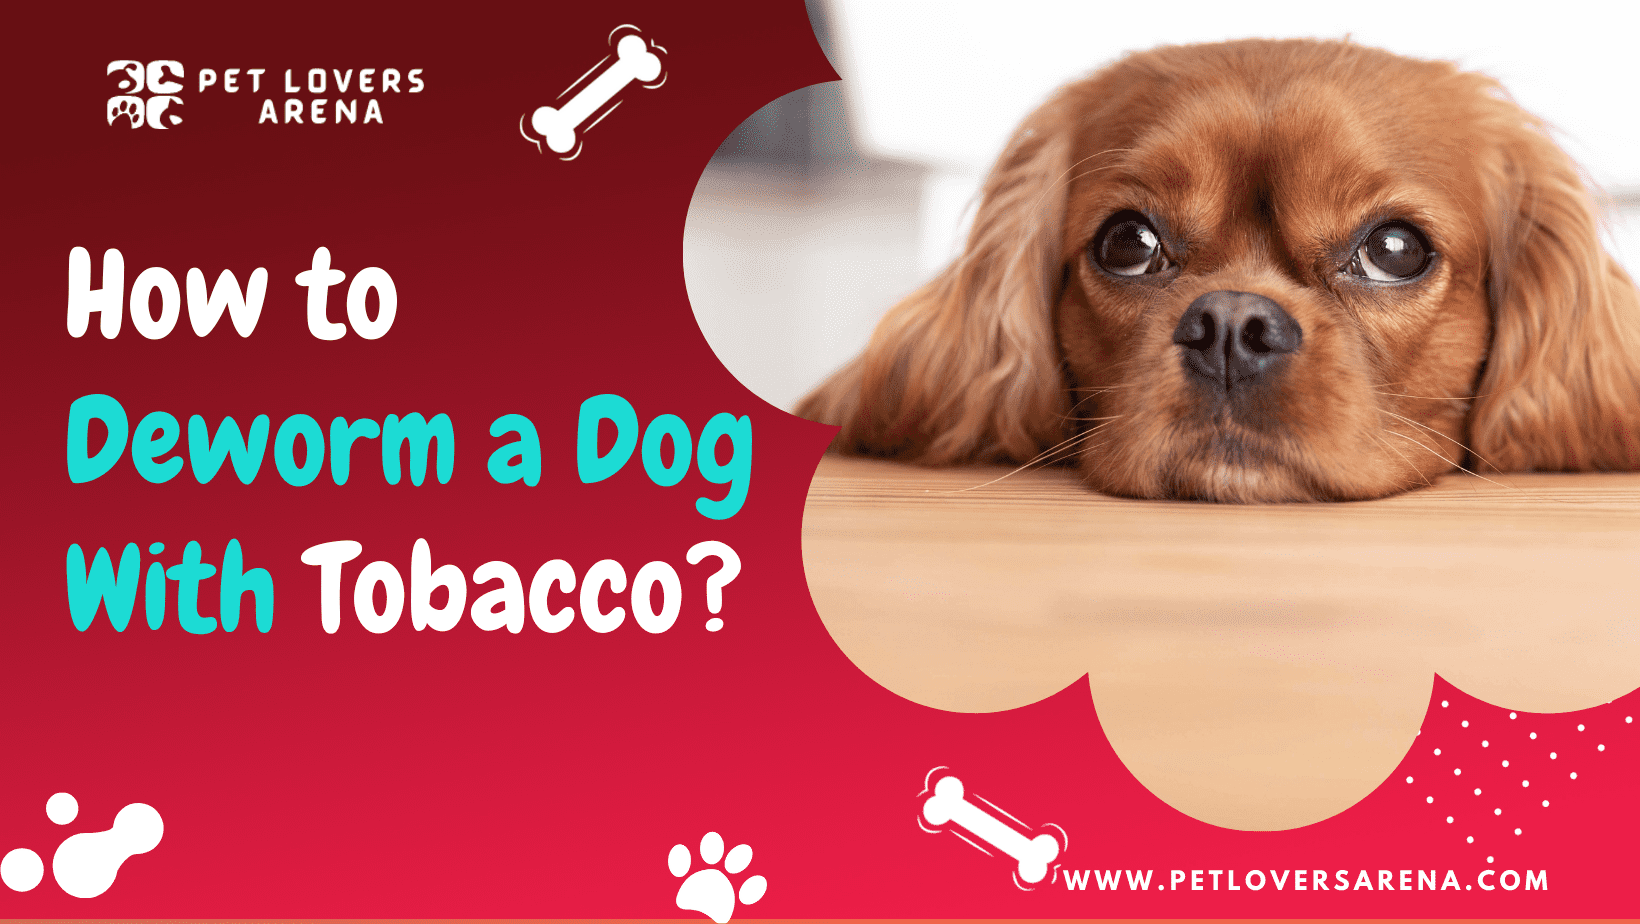 how to deworm a dog with tobacco